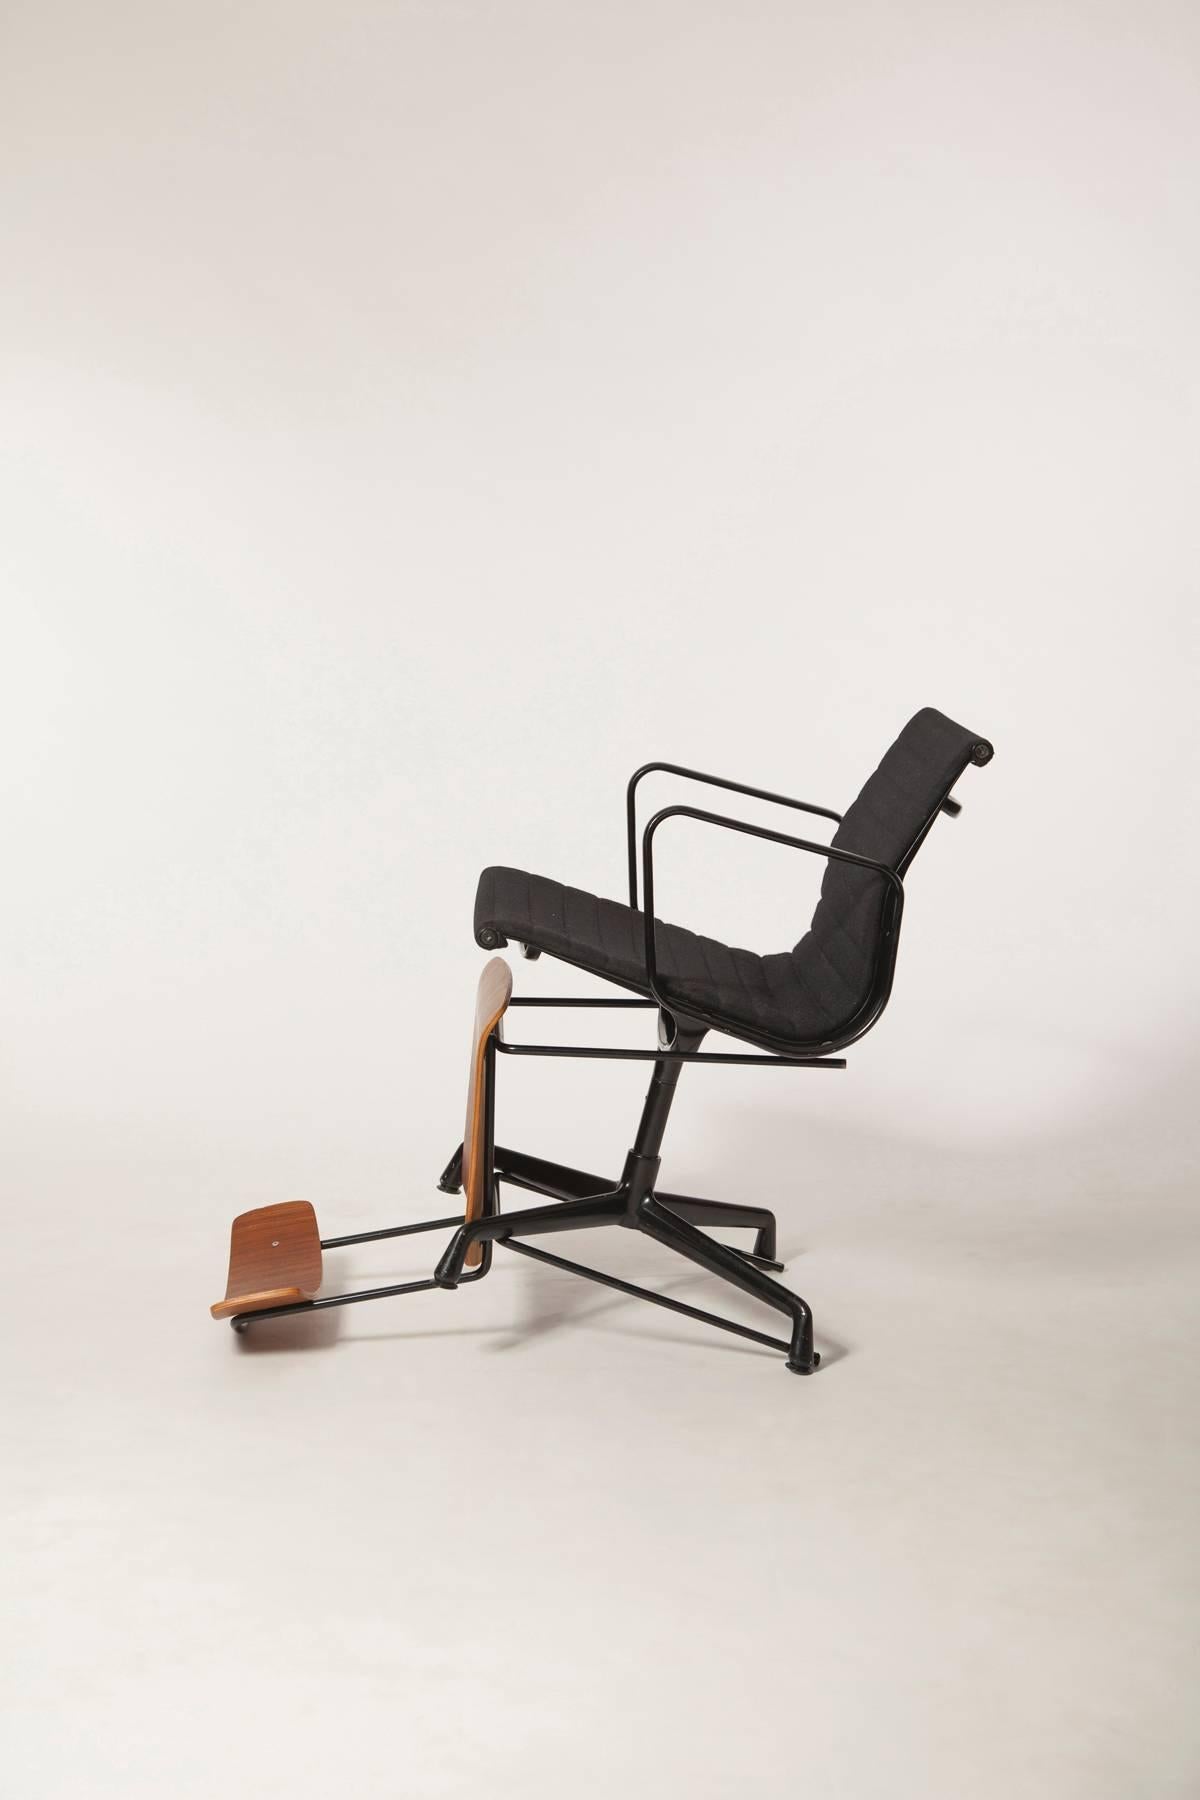 The Chair Affair 05 by Lucas Maassen and Magriet Craens, 2015

Netherlands, 2015
C-Print, mounted to Acid Free Archival Museum Board
Print: H 19.5 in x 13 in
Framed: H 21.5 in x 15 in

Price includes frame
Edition of 12